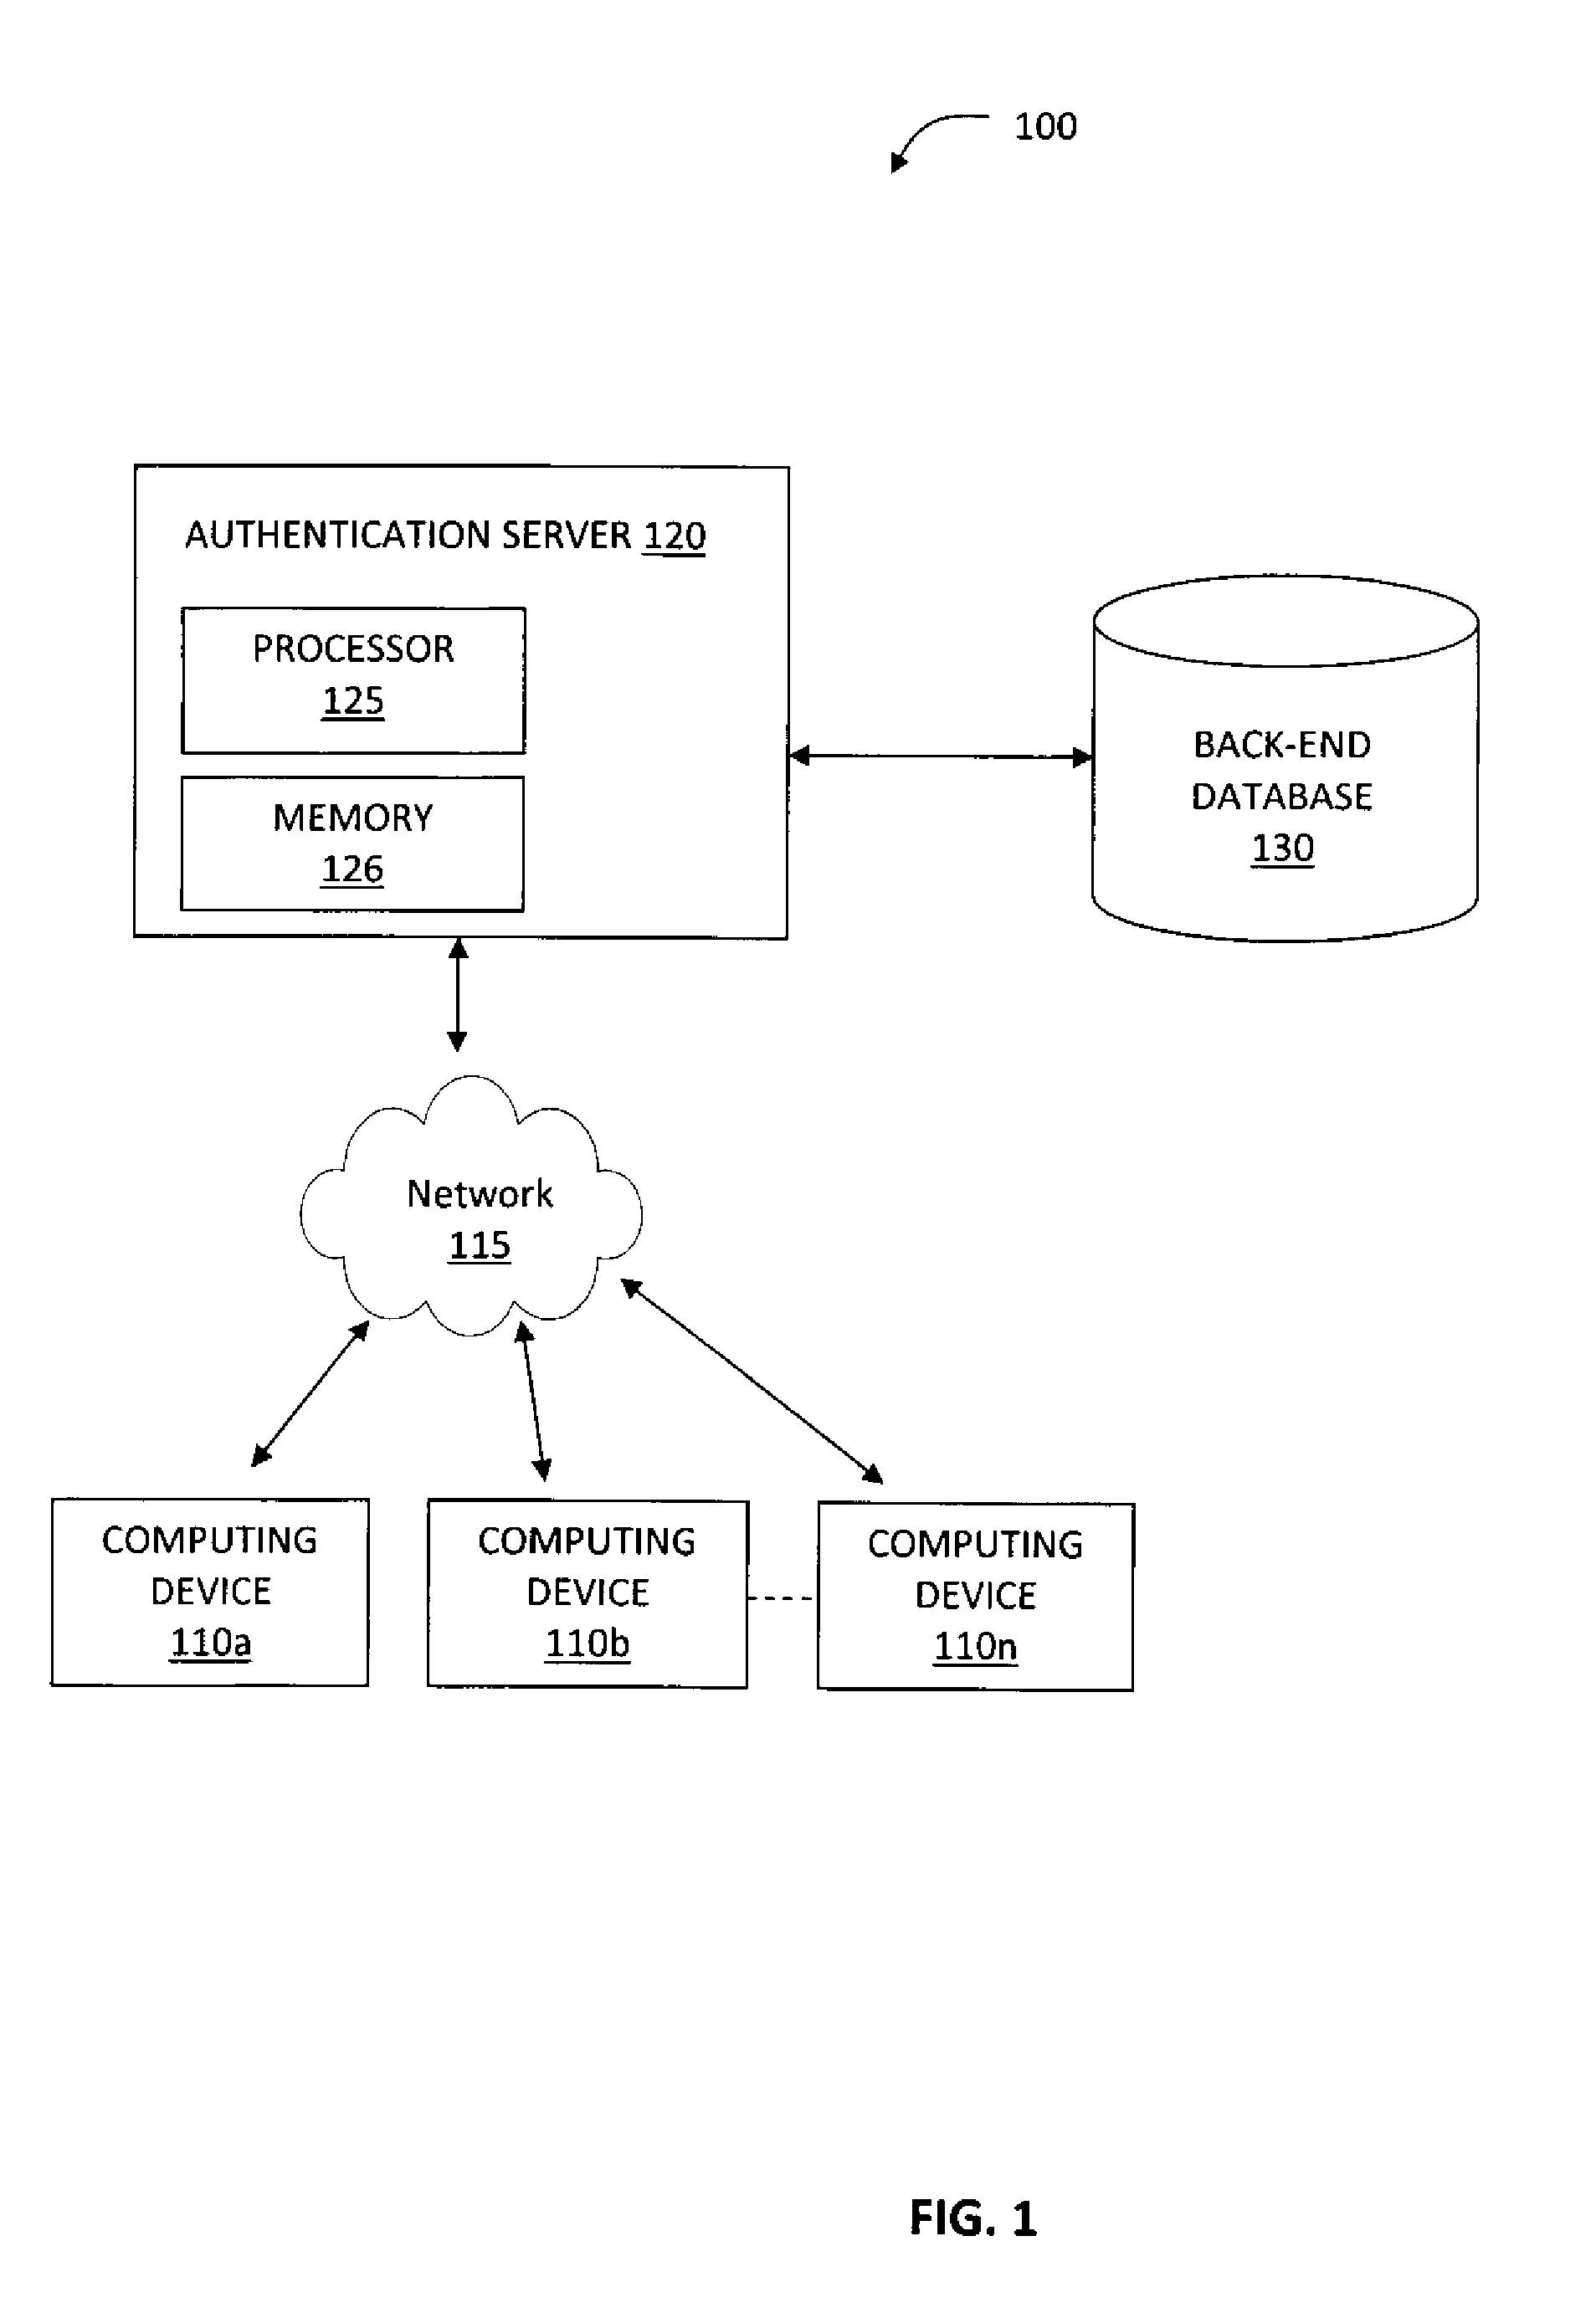 System and Method for Risk Assessment of Login Transactions Through Password Analysis